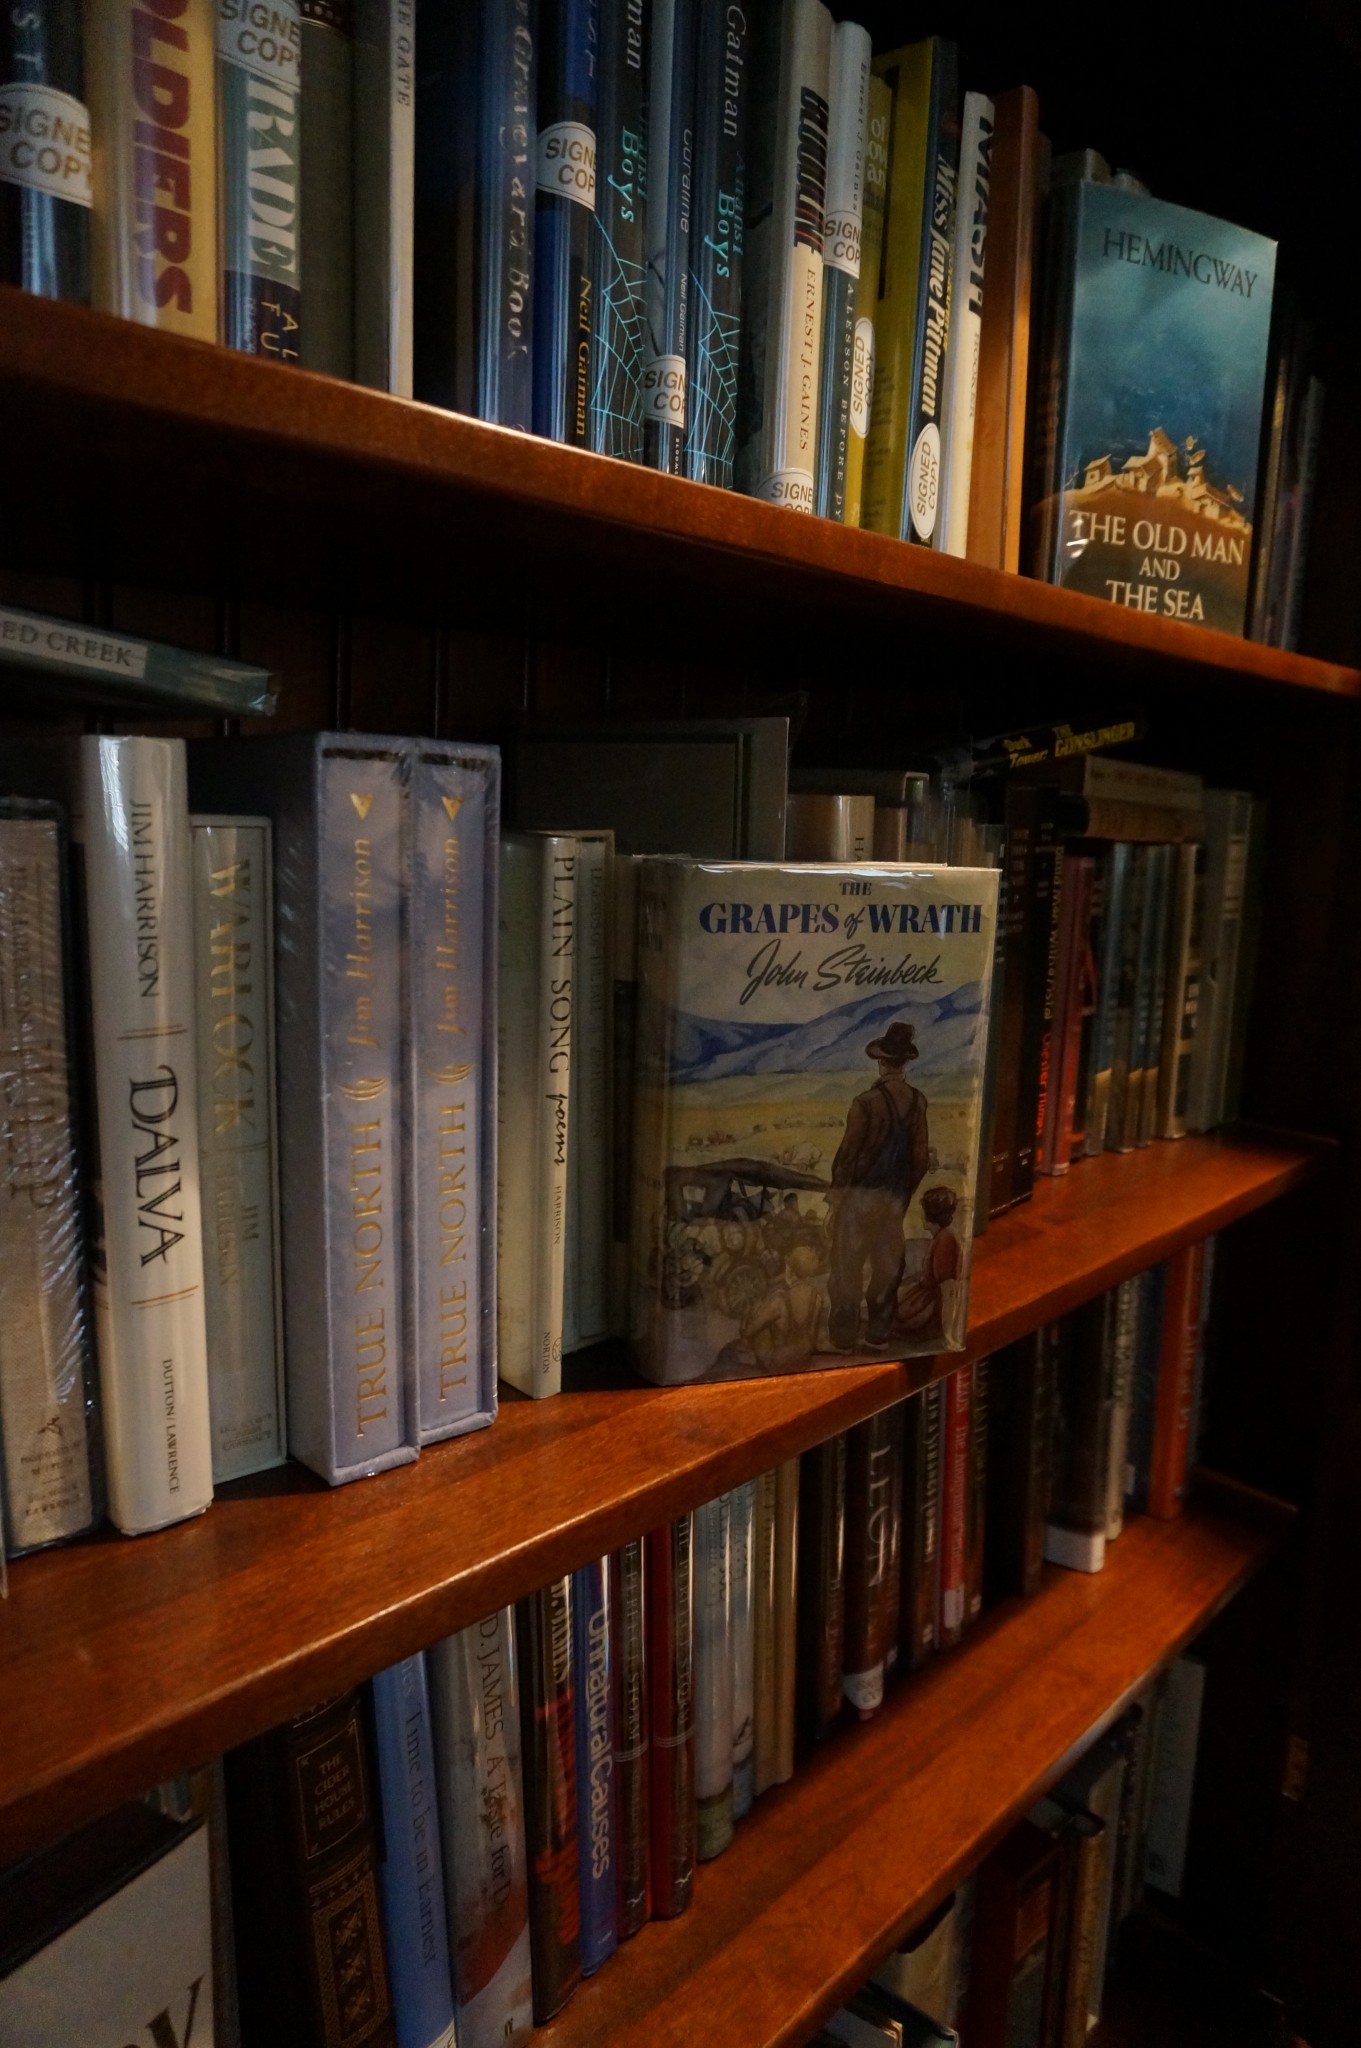 "Grapes of Wrath" (Steinbeck) and "The Old Man and the Sea" (Hemingway) are just two of the collectible classic books that Lyons' Fine Books has to offer.